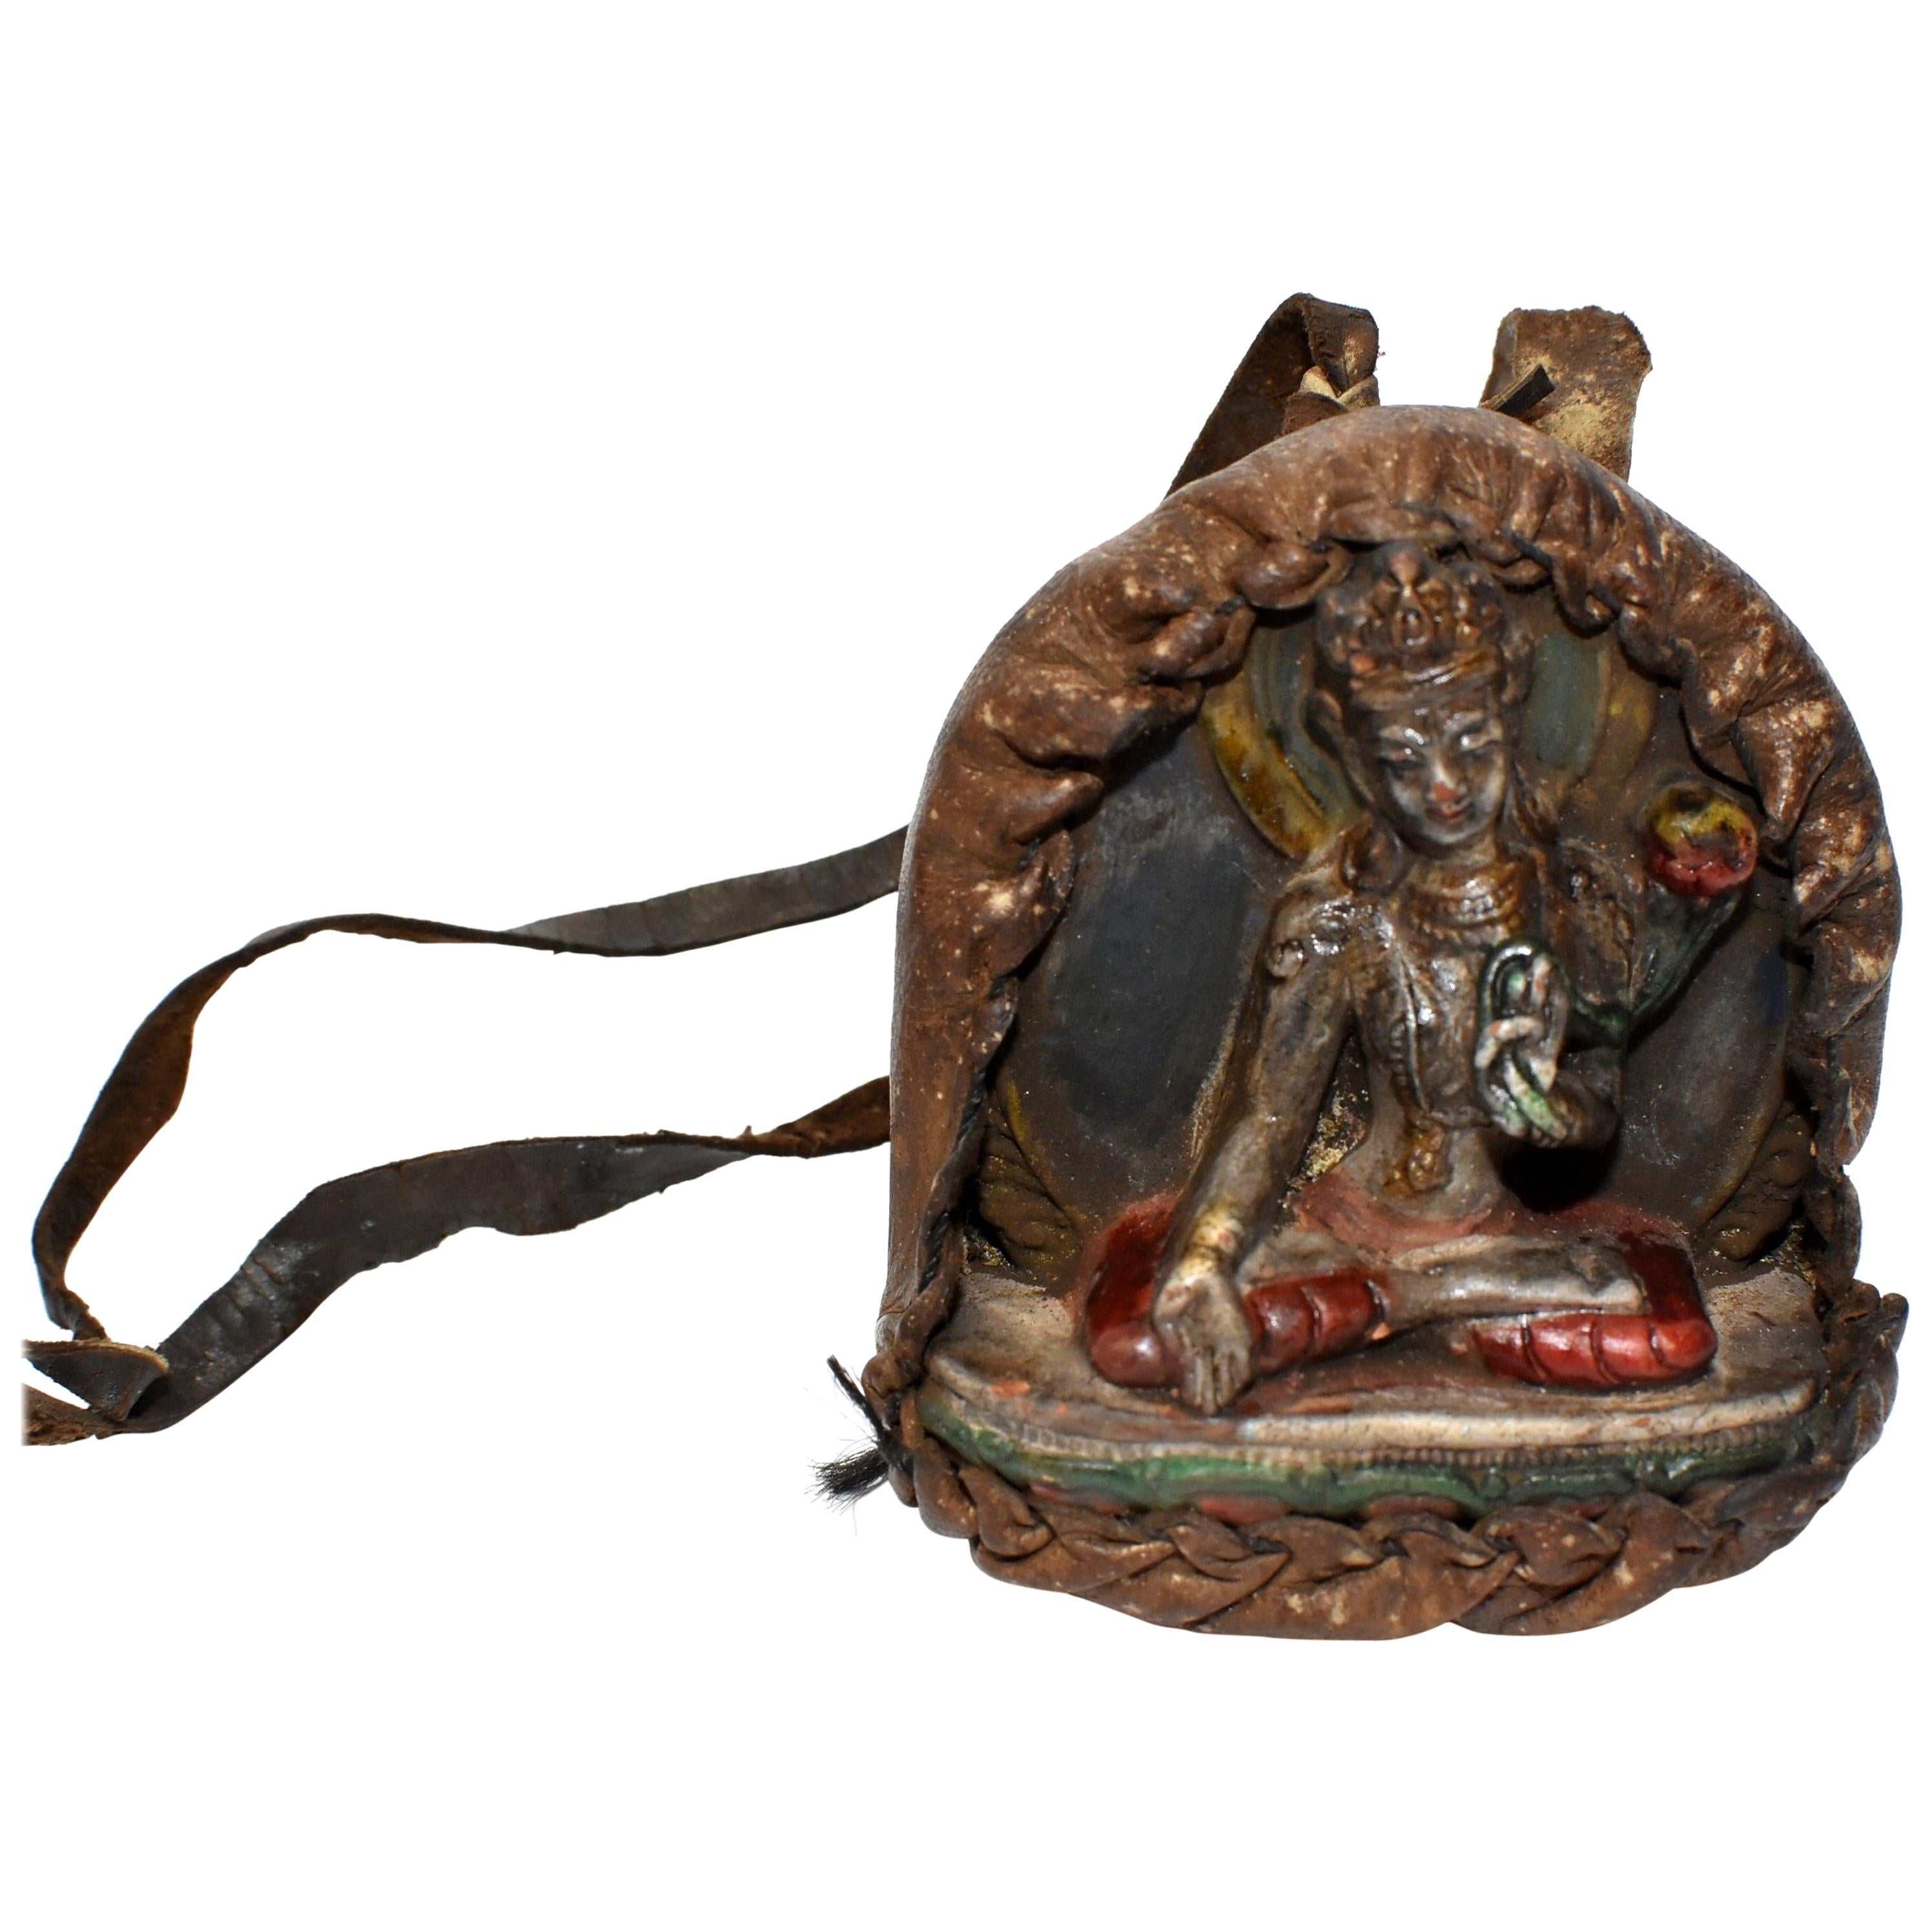 A Tibetan amulet featuring Tara encased in a handmade leather shrine. The Tara is made of terracotta, beautifully crafted displaying well defined facial features, decorated robe and a wonderful smile. Unique silver finish. Such an amulet is